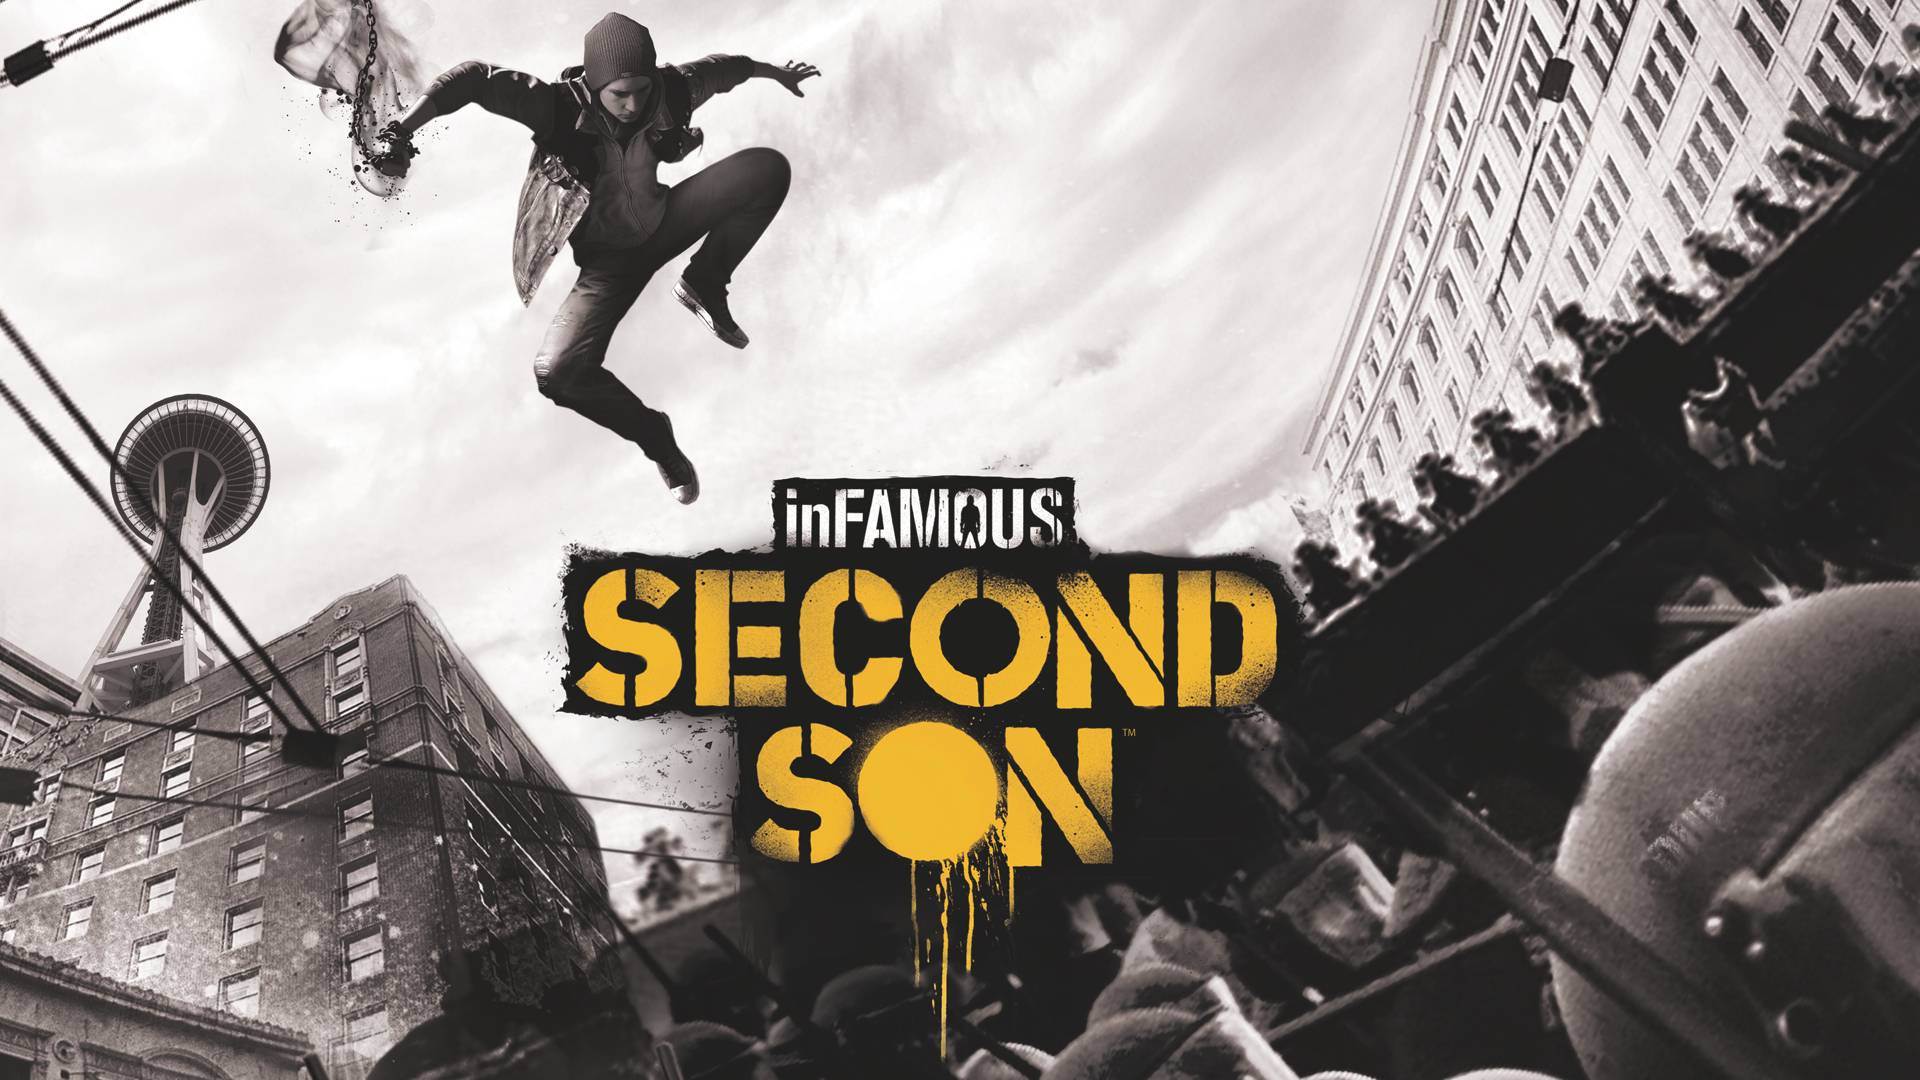 Infamous Second Son Ps4 Wallpaper 1080p Gamingbolt Video Game